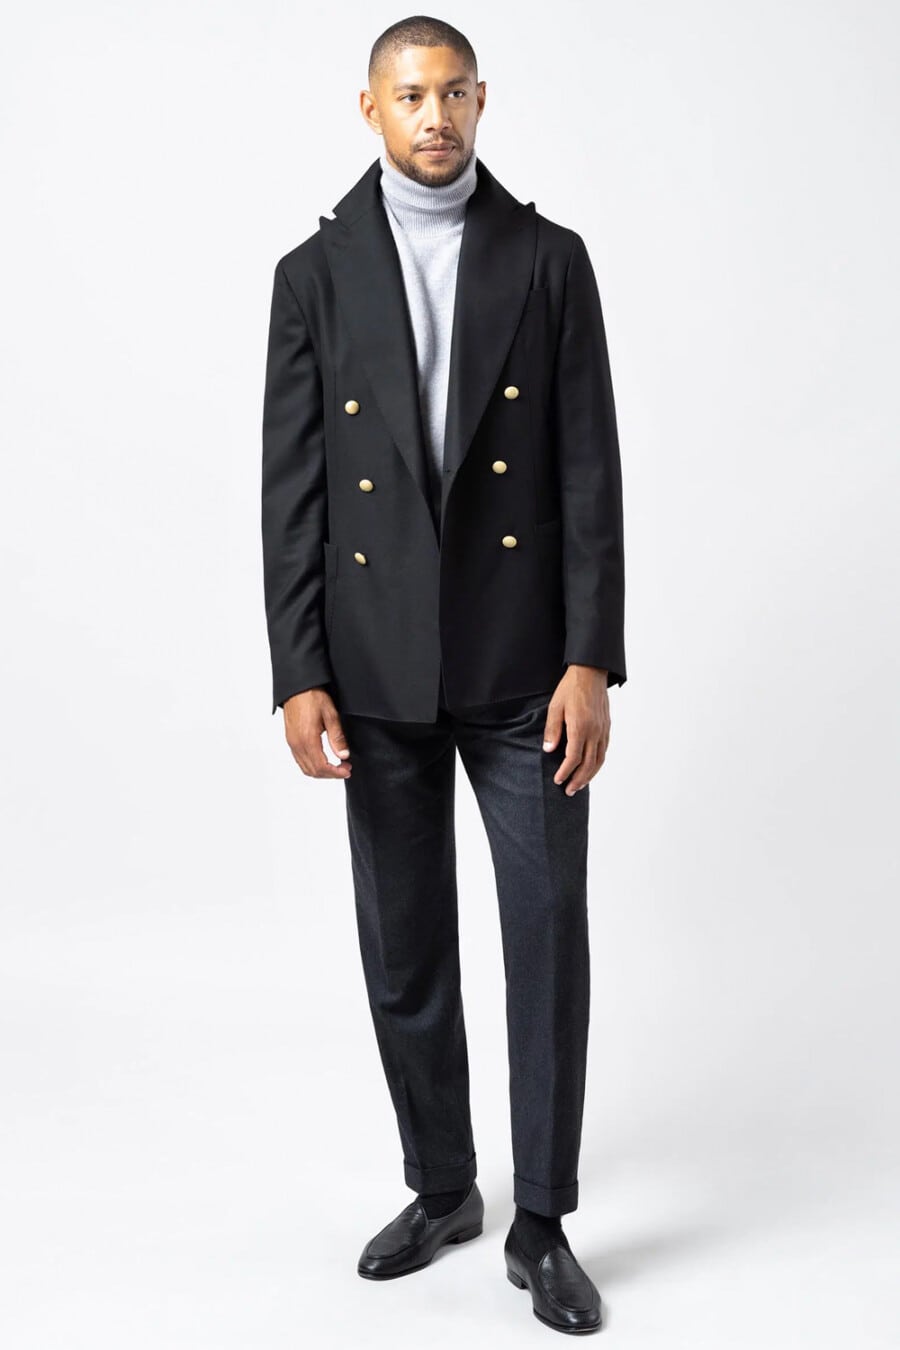 Men's navy pants, sky blue turtleneck, oversized navy double-breasted blazer and black leather Belgian loafers outfit